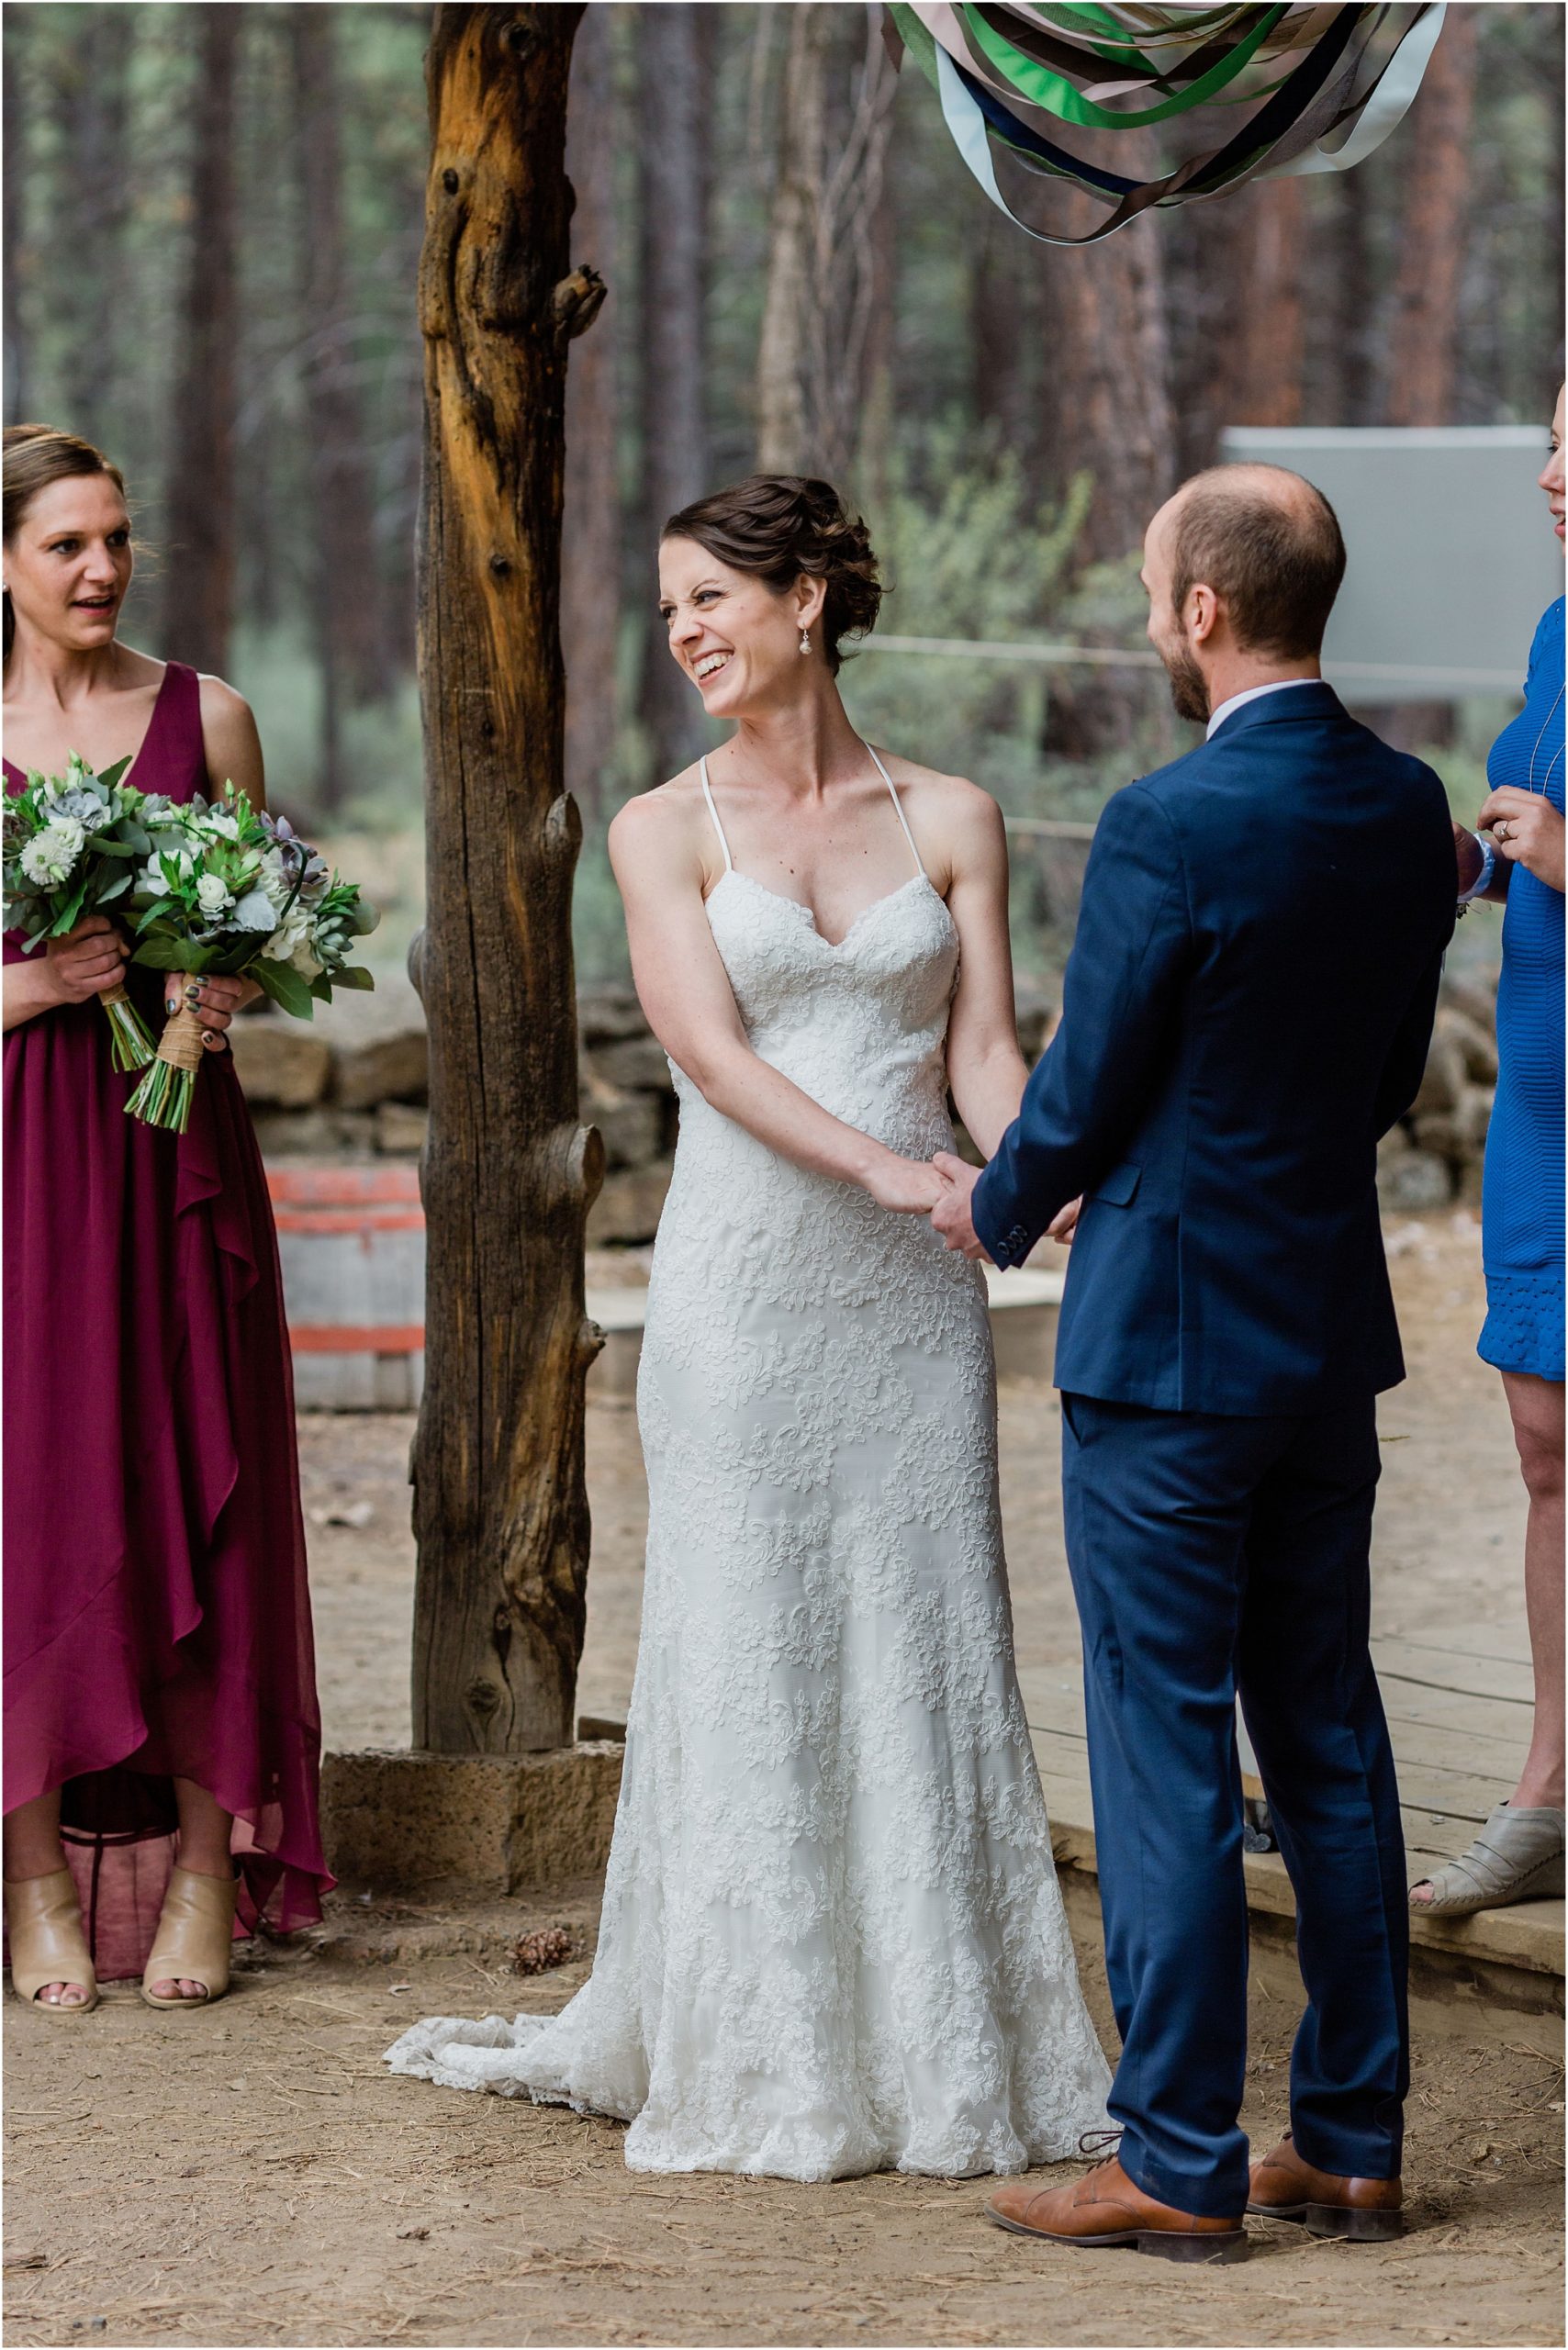 This beautiful bride is all smiles as she holds hands with her handsome groom at her rustic outdoor wedding in Bend, OR. | Erica Swantek Photography